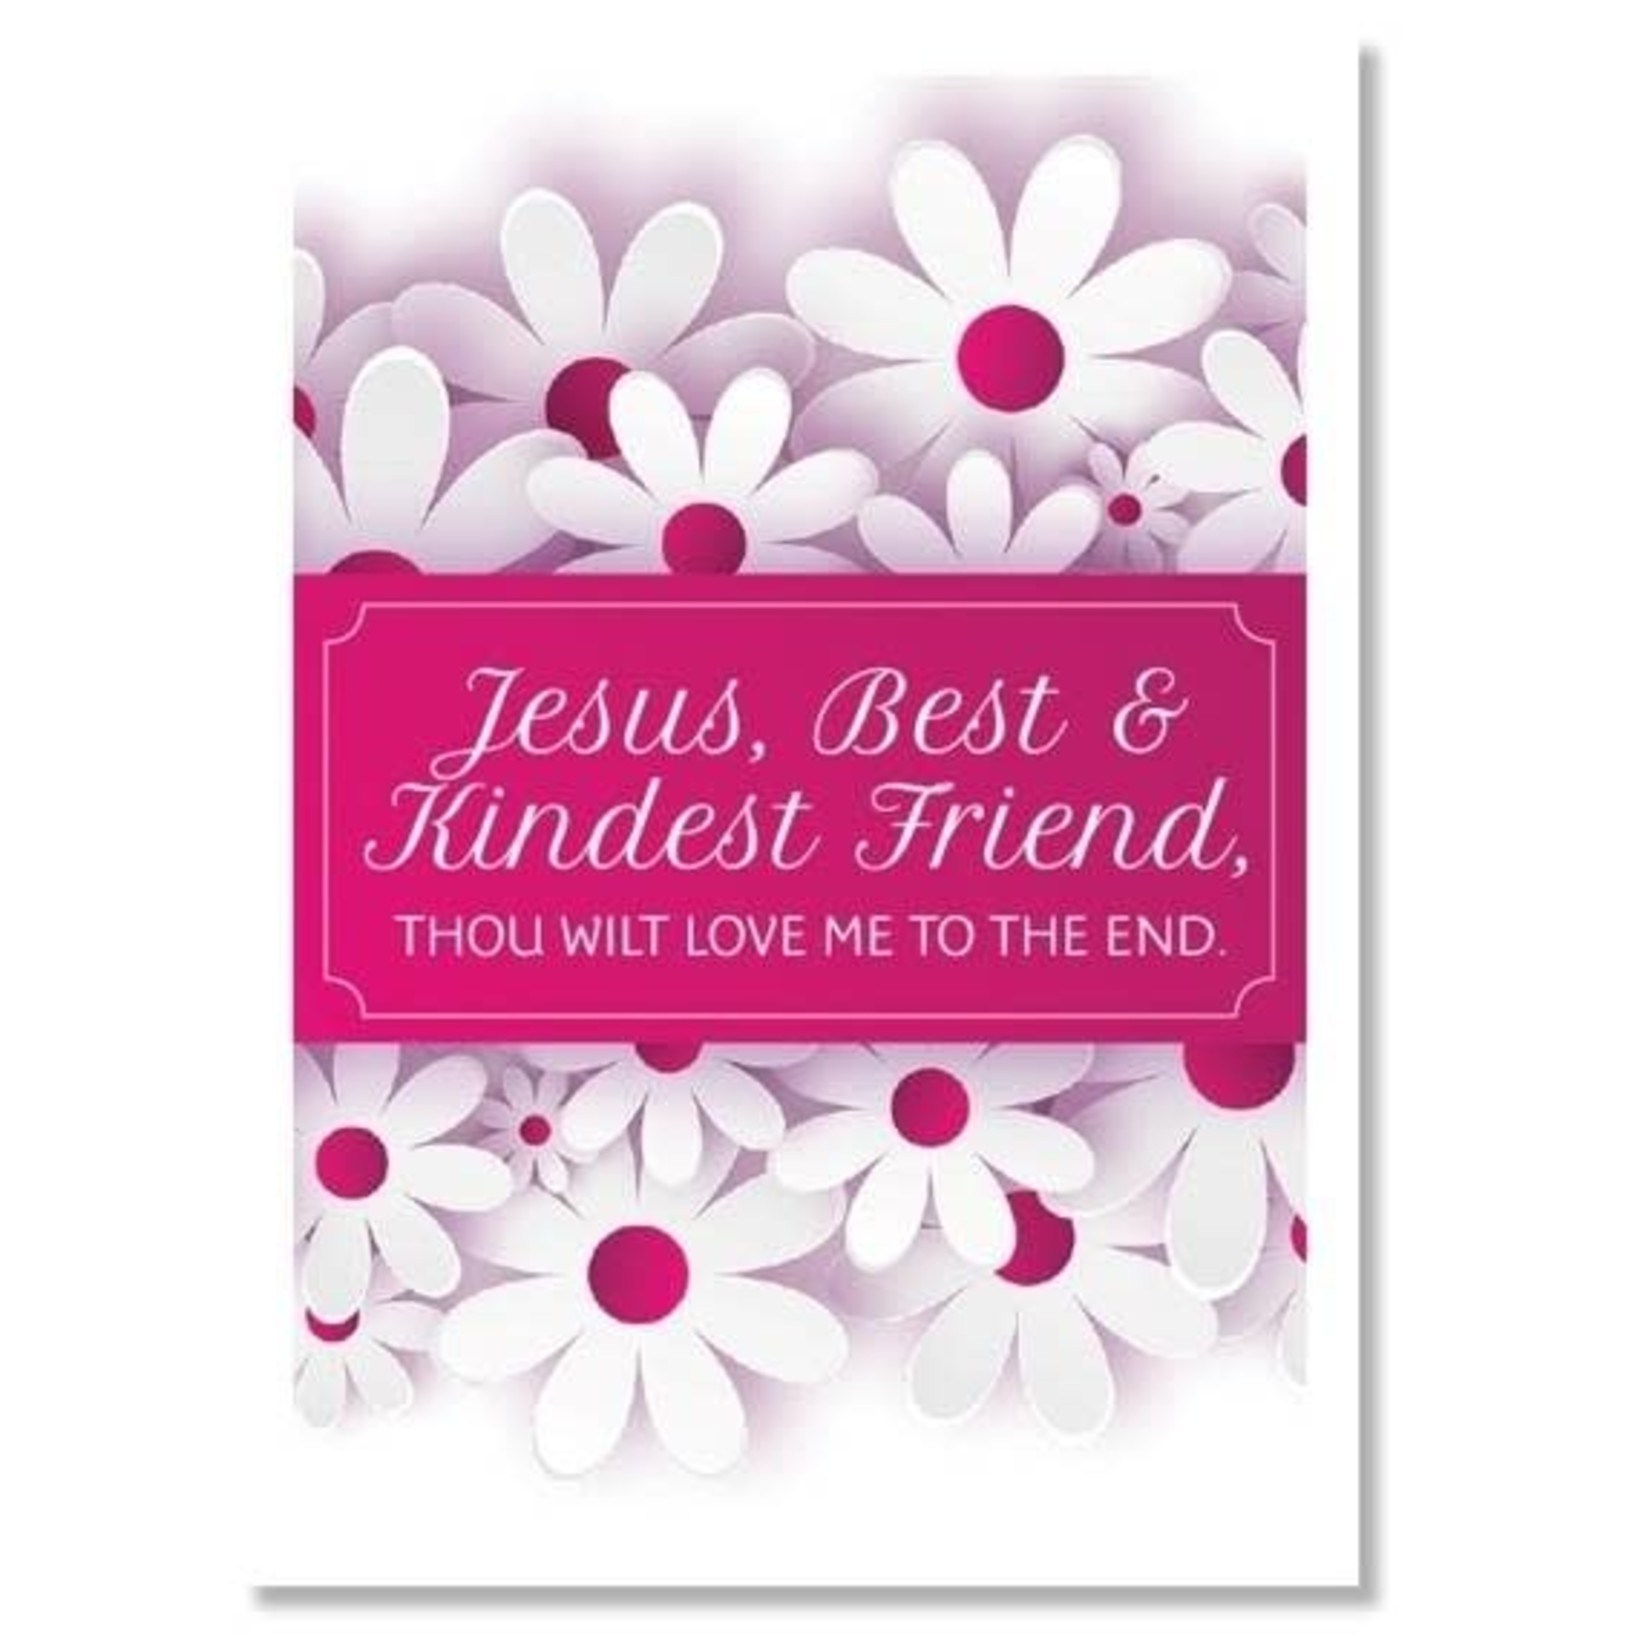 Hymns In My Heart - 5x7" Greeting Card - Confirmation - Jesus, Best and Kindest Friend